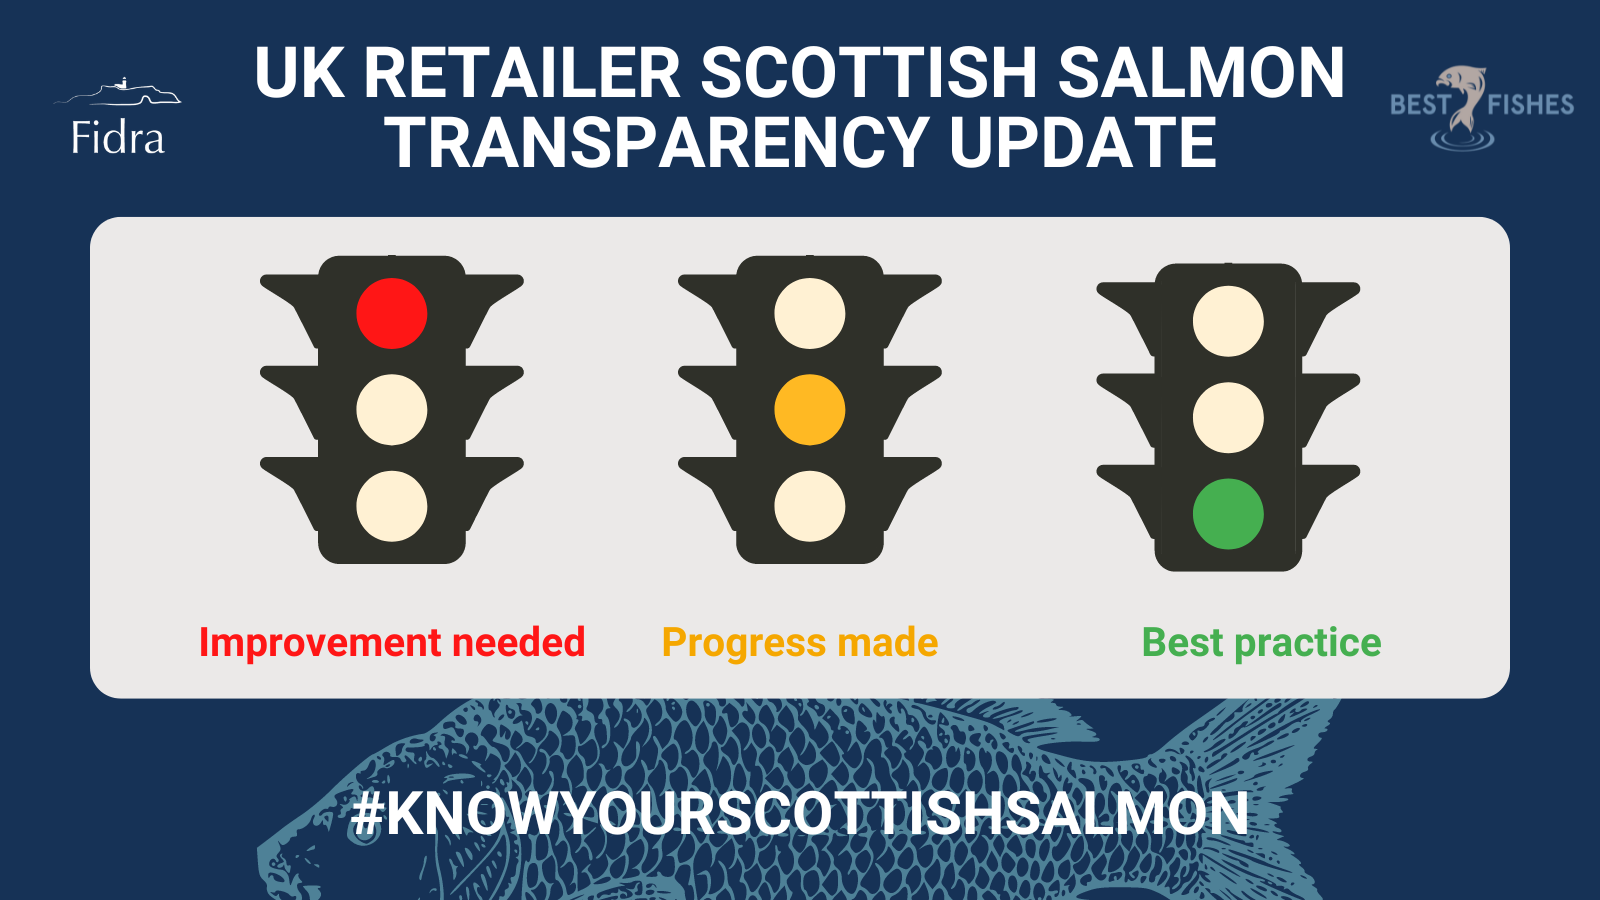 To support consumers and to ensure the industry is accountable across the supply chain, retailers must be proactive in improving traceability, transparency and reducing the environmental impacts of Scottish salmon farming.